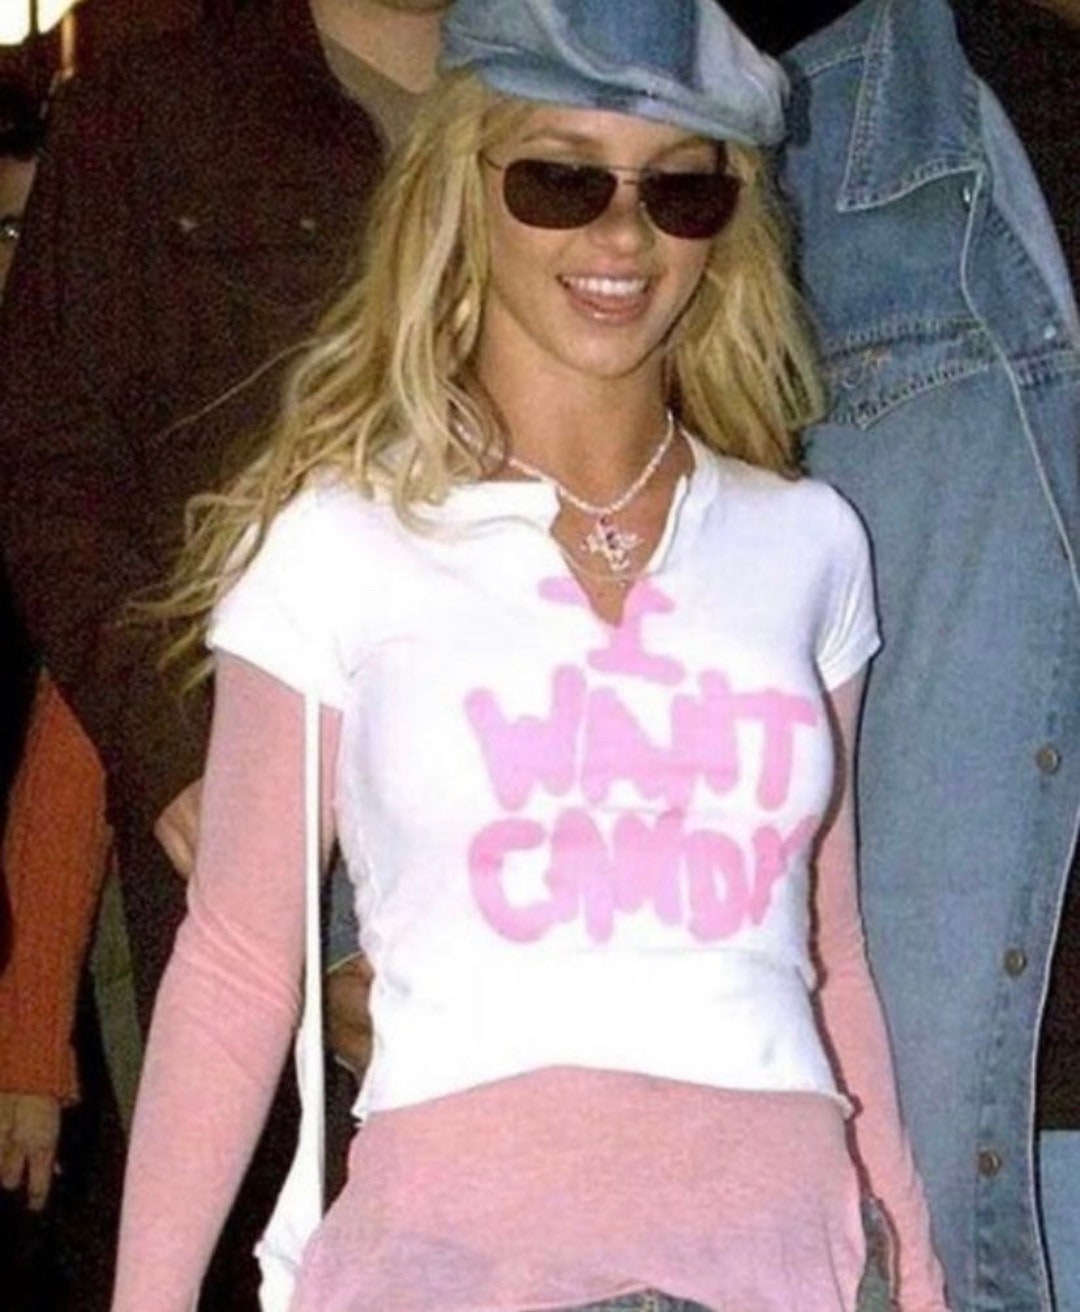 Britney Spears 2000s Y2K I Want Candy Inspired Shirt - Etsy Hong Kong